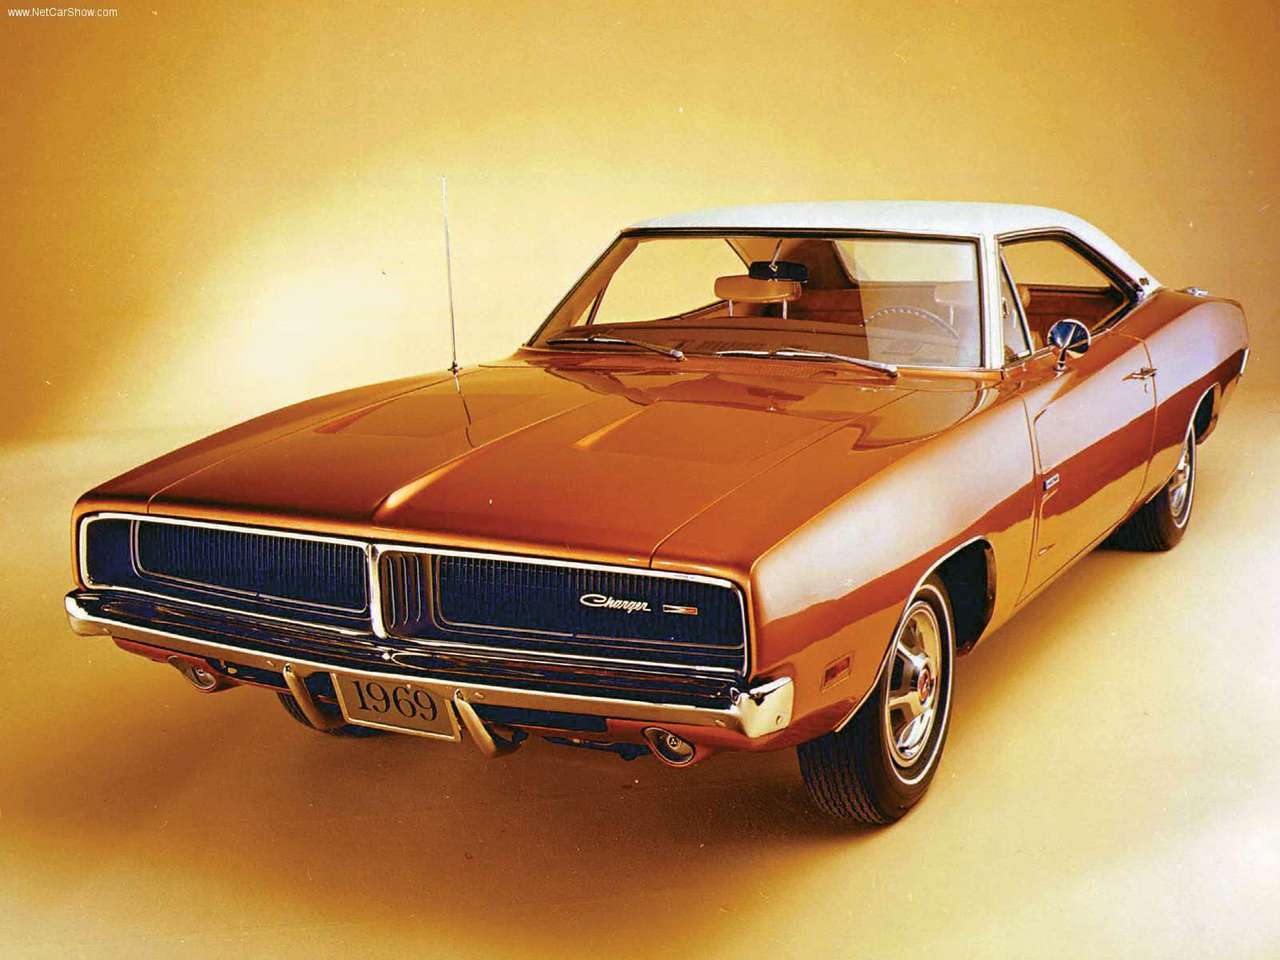 WallpaperSS - Dodge Charger 1969